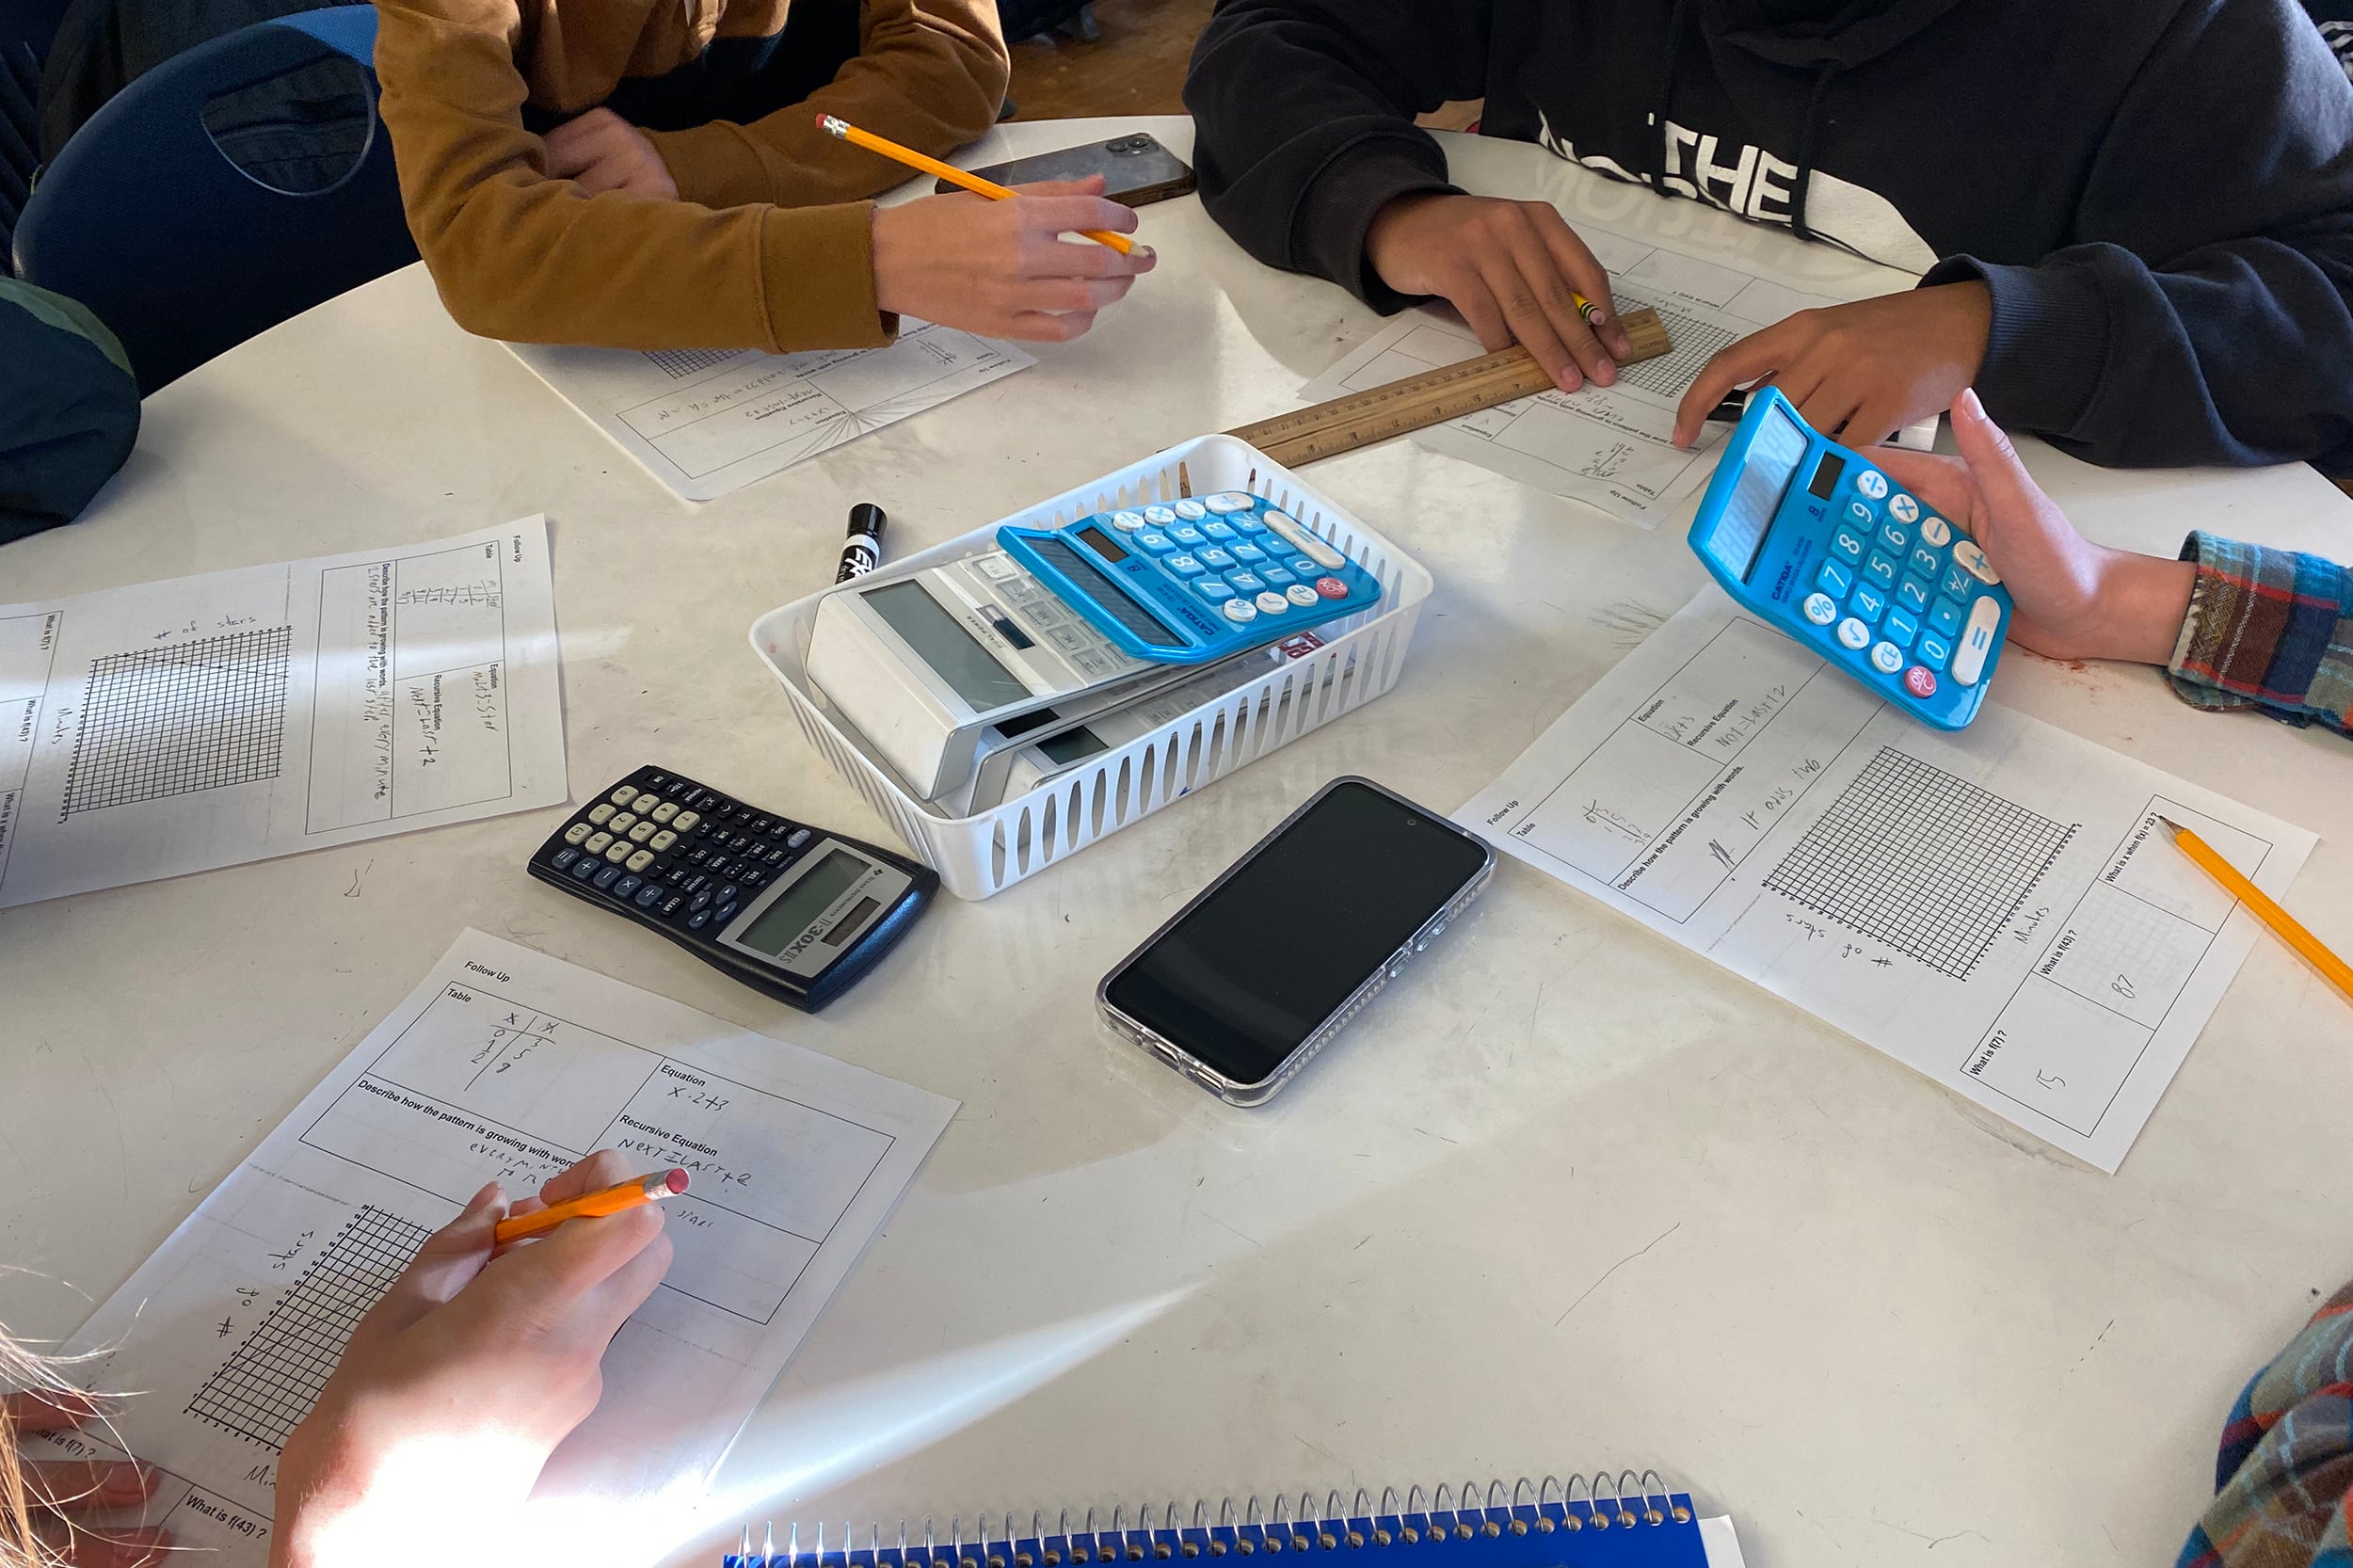 Four students sit at a table working on classwork. The table is white with papers and blue calculators.